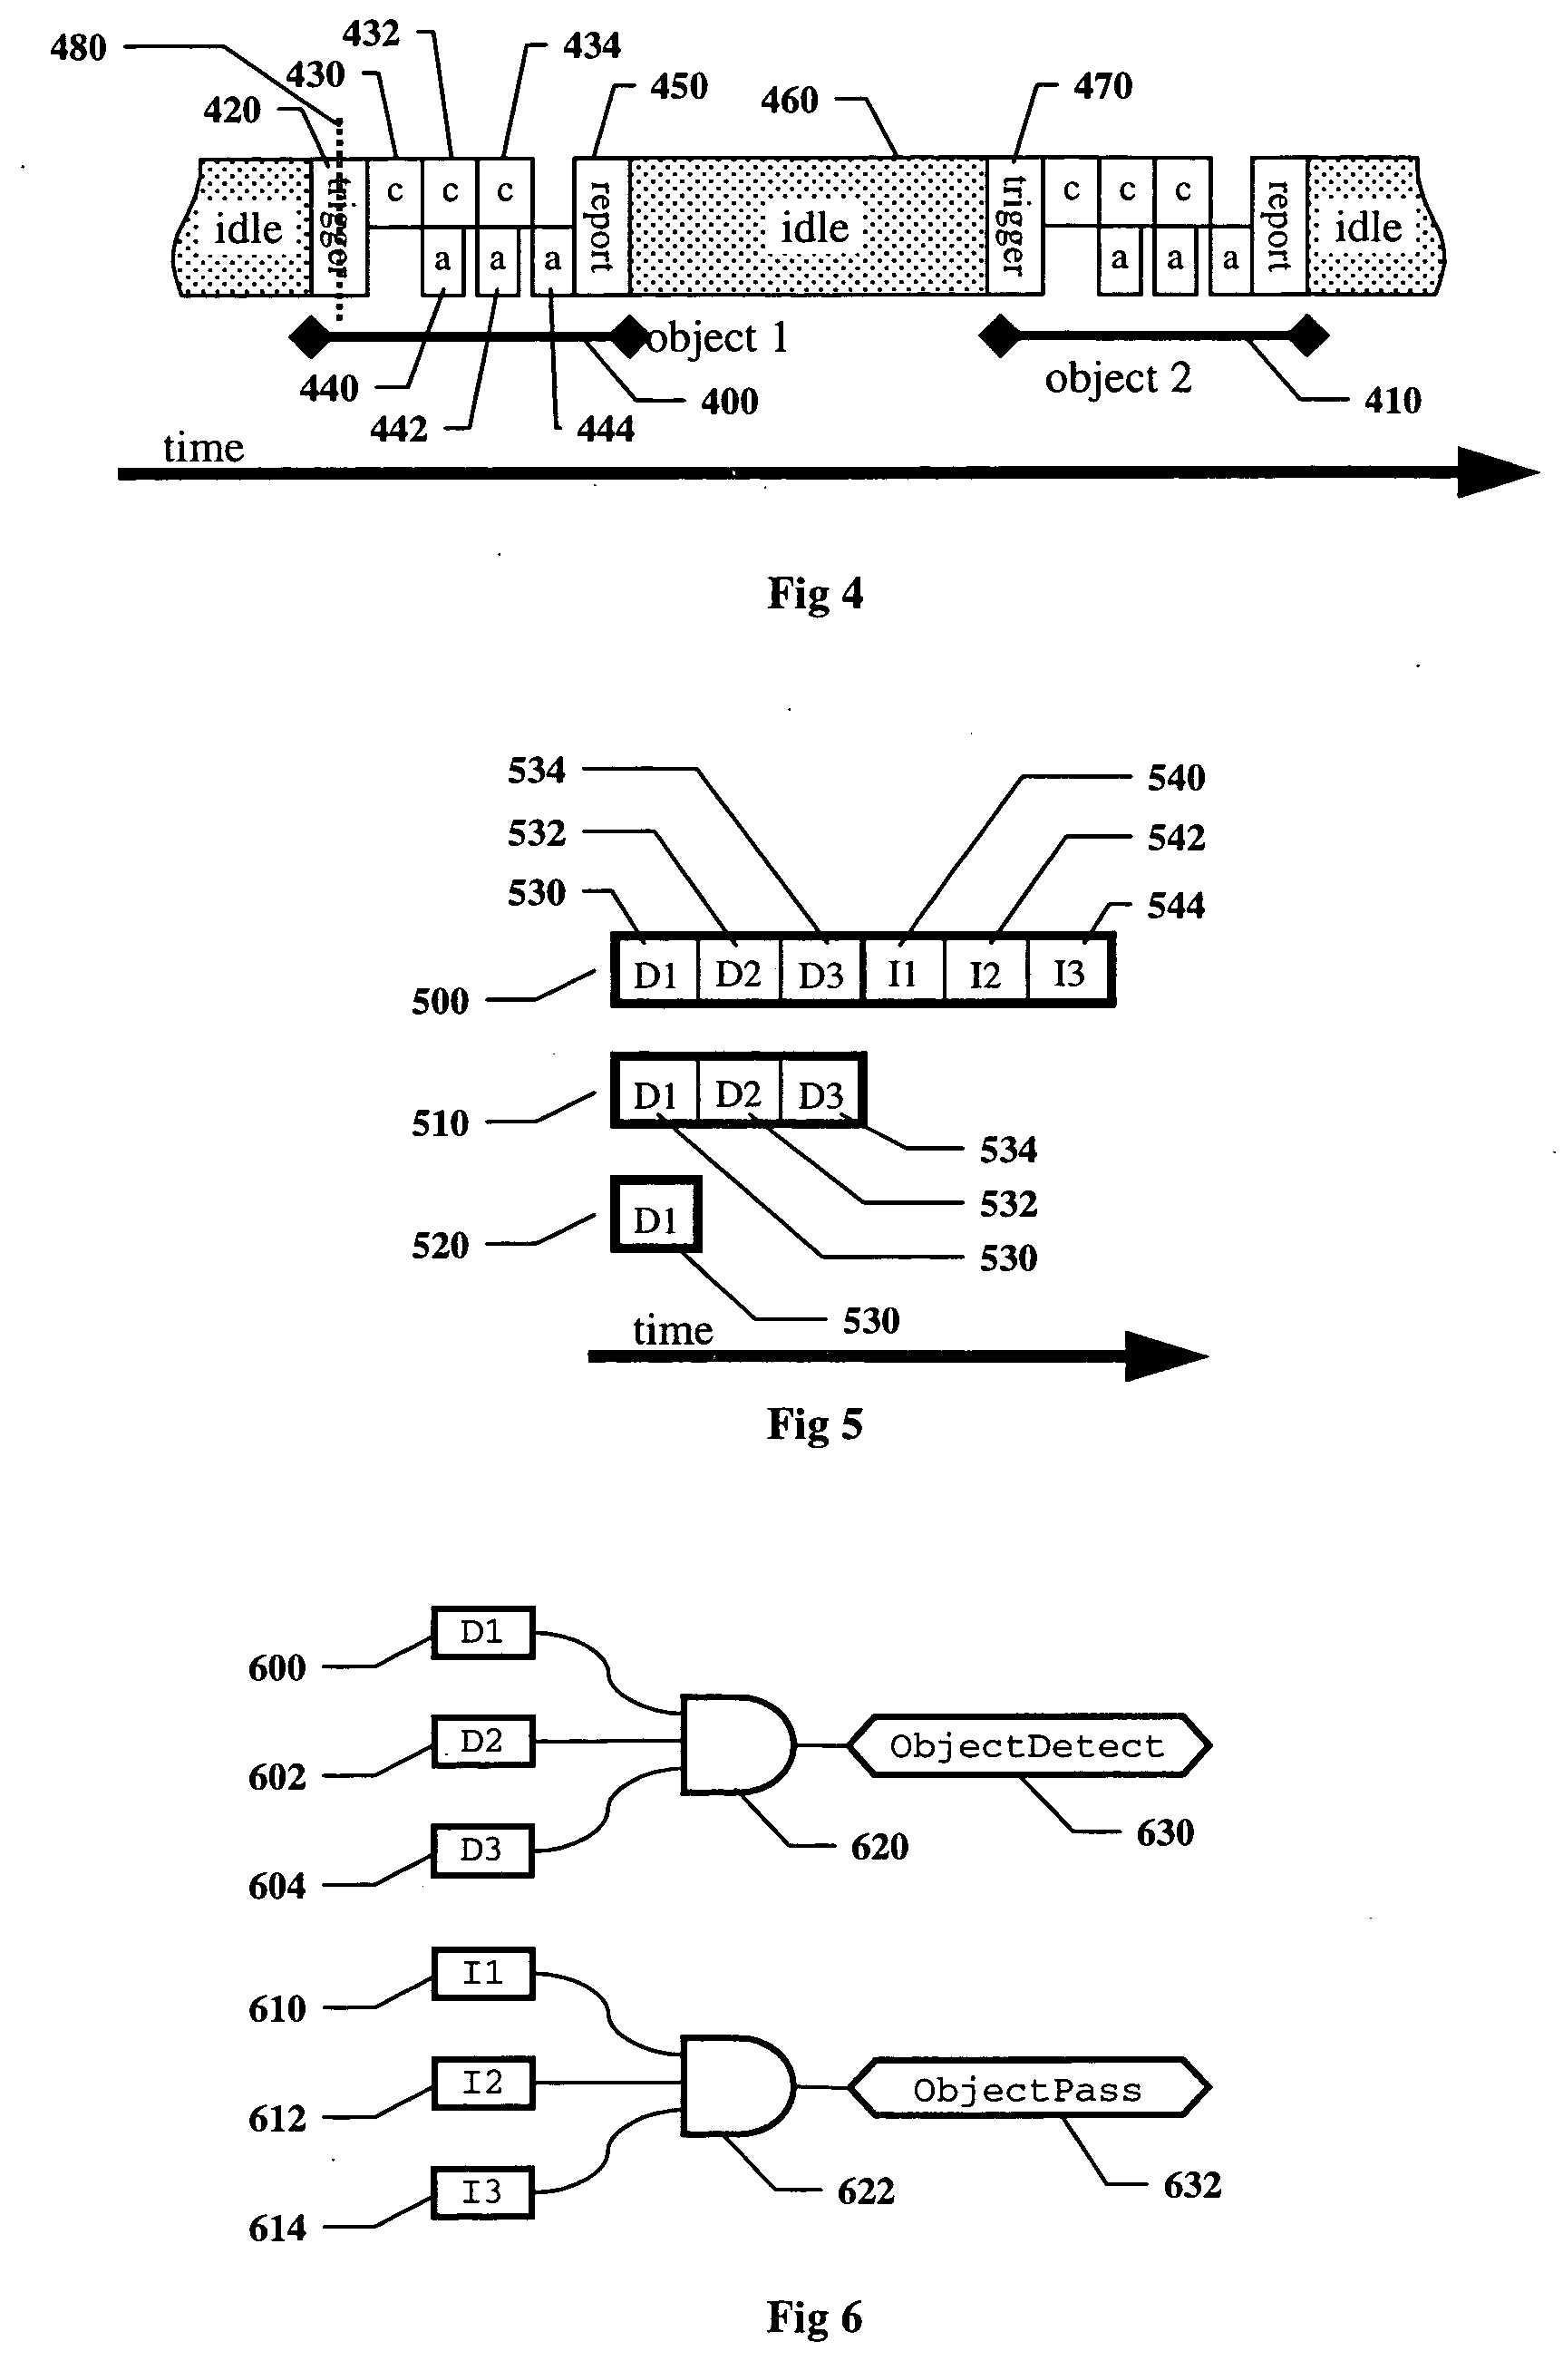 Method and apparatus for improved vision detector image capture and analysis